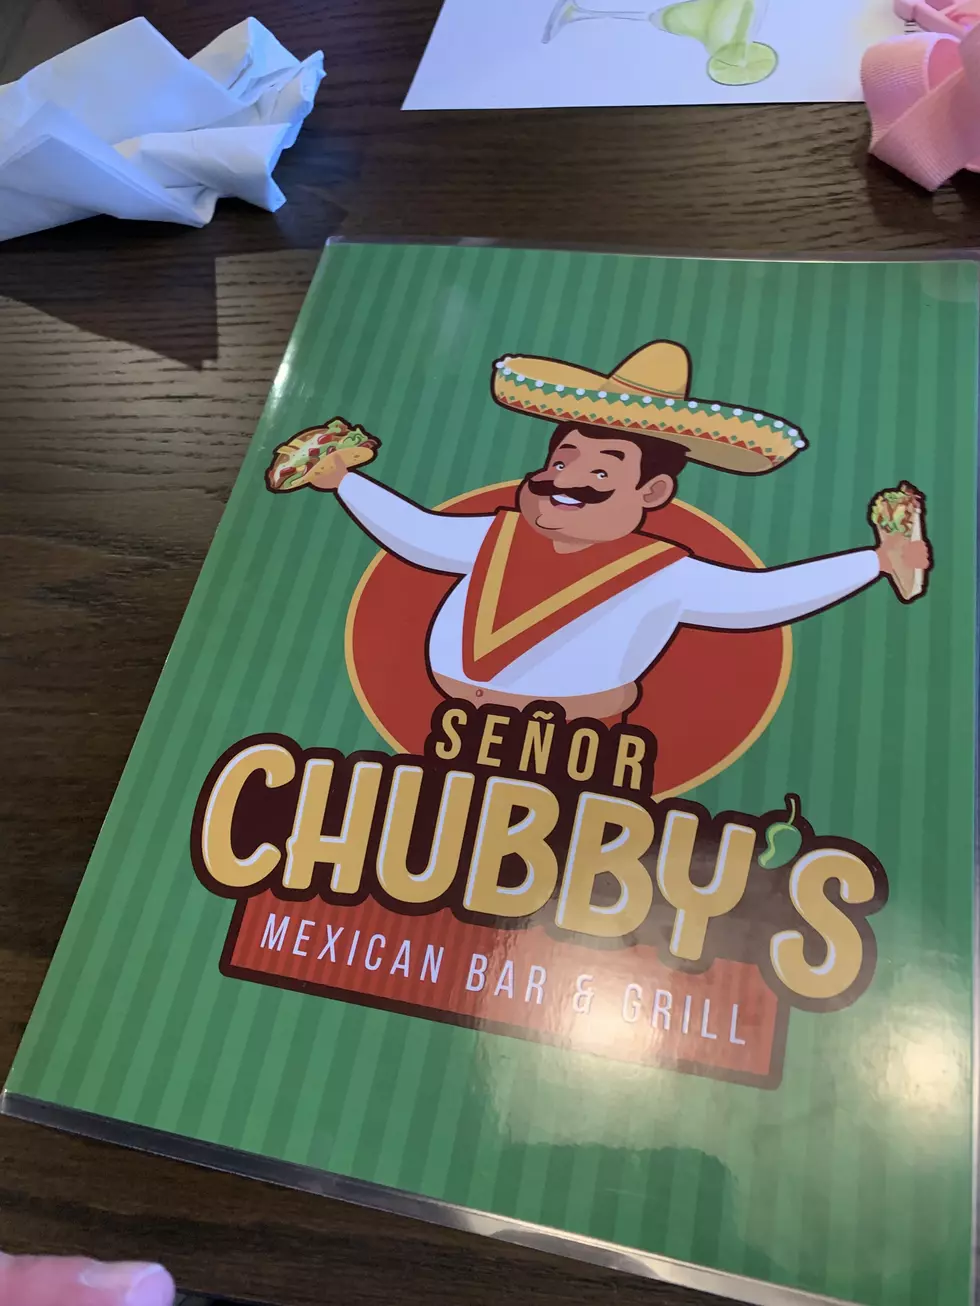 Review: Amarillo’s Senor Chubby’s Mexican Bar & Grill